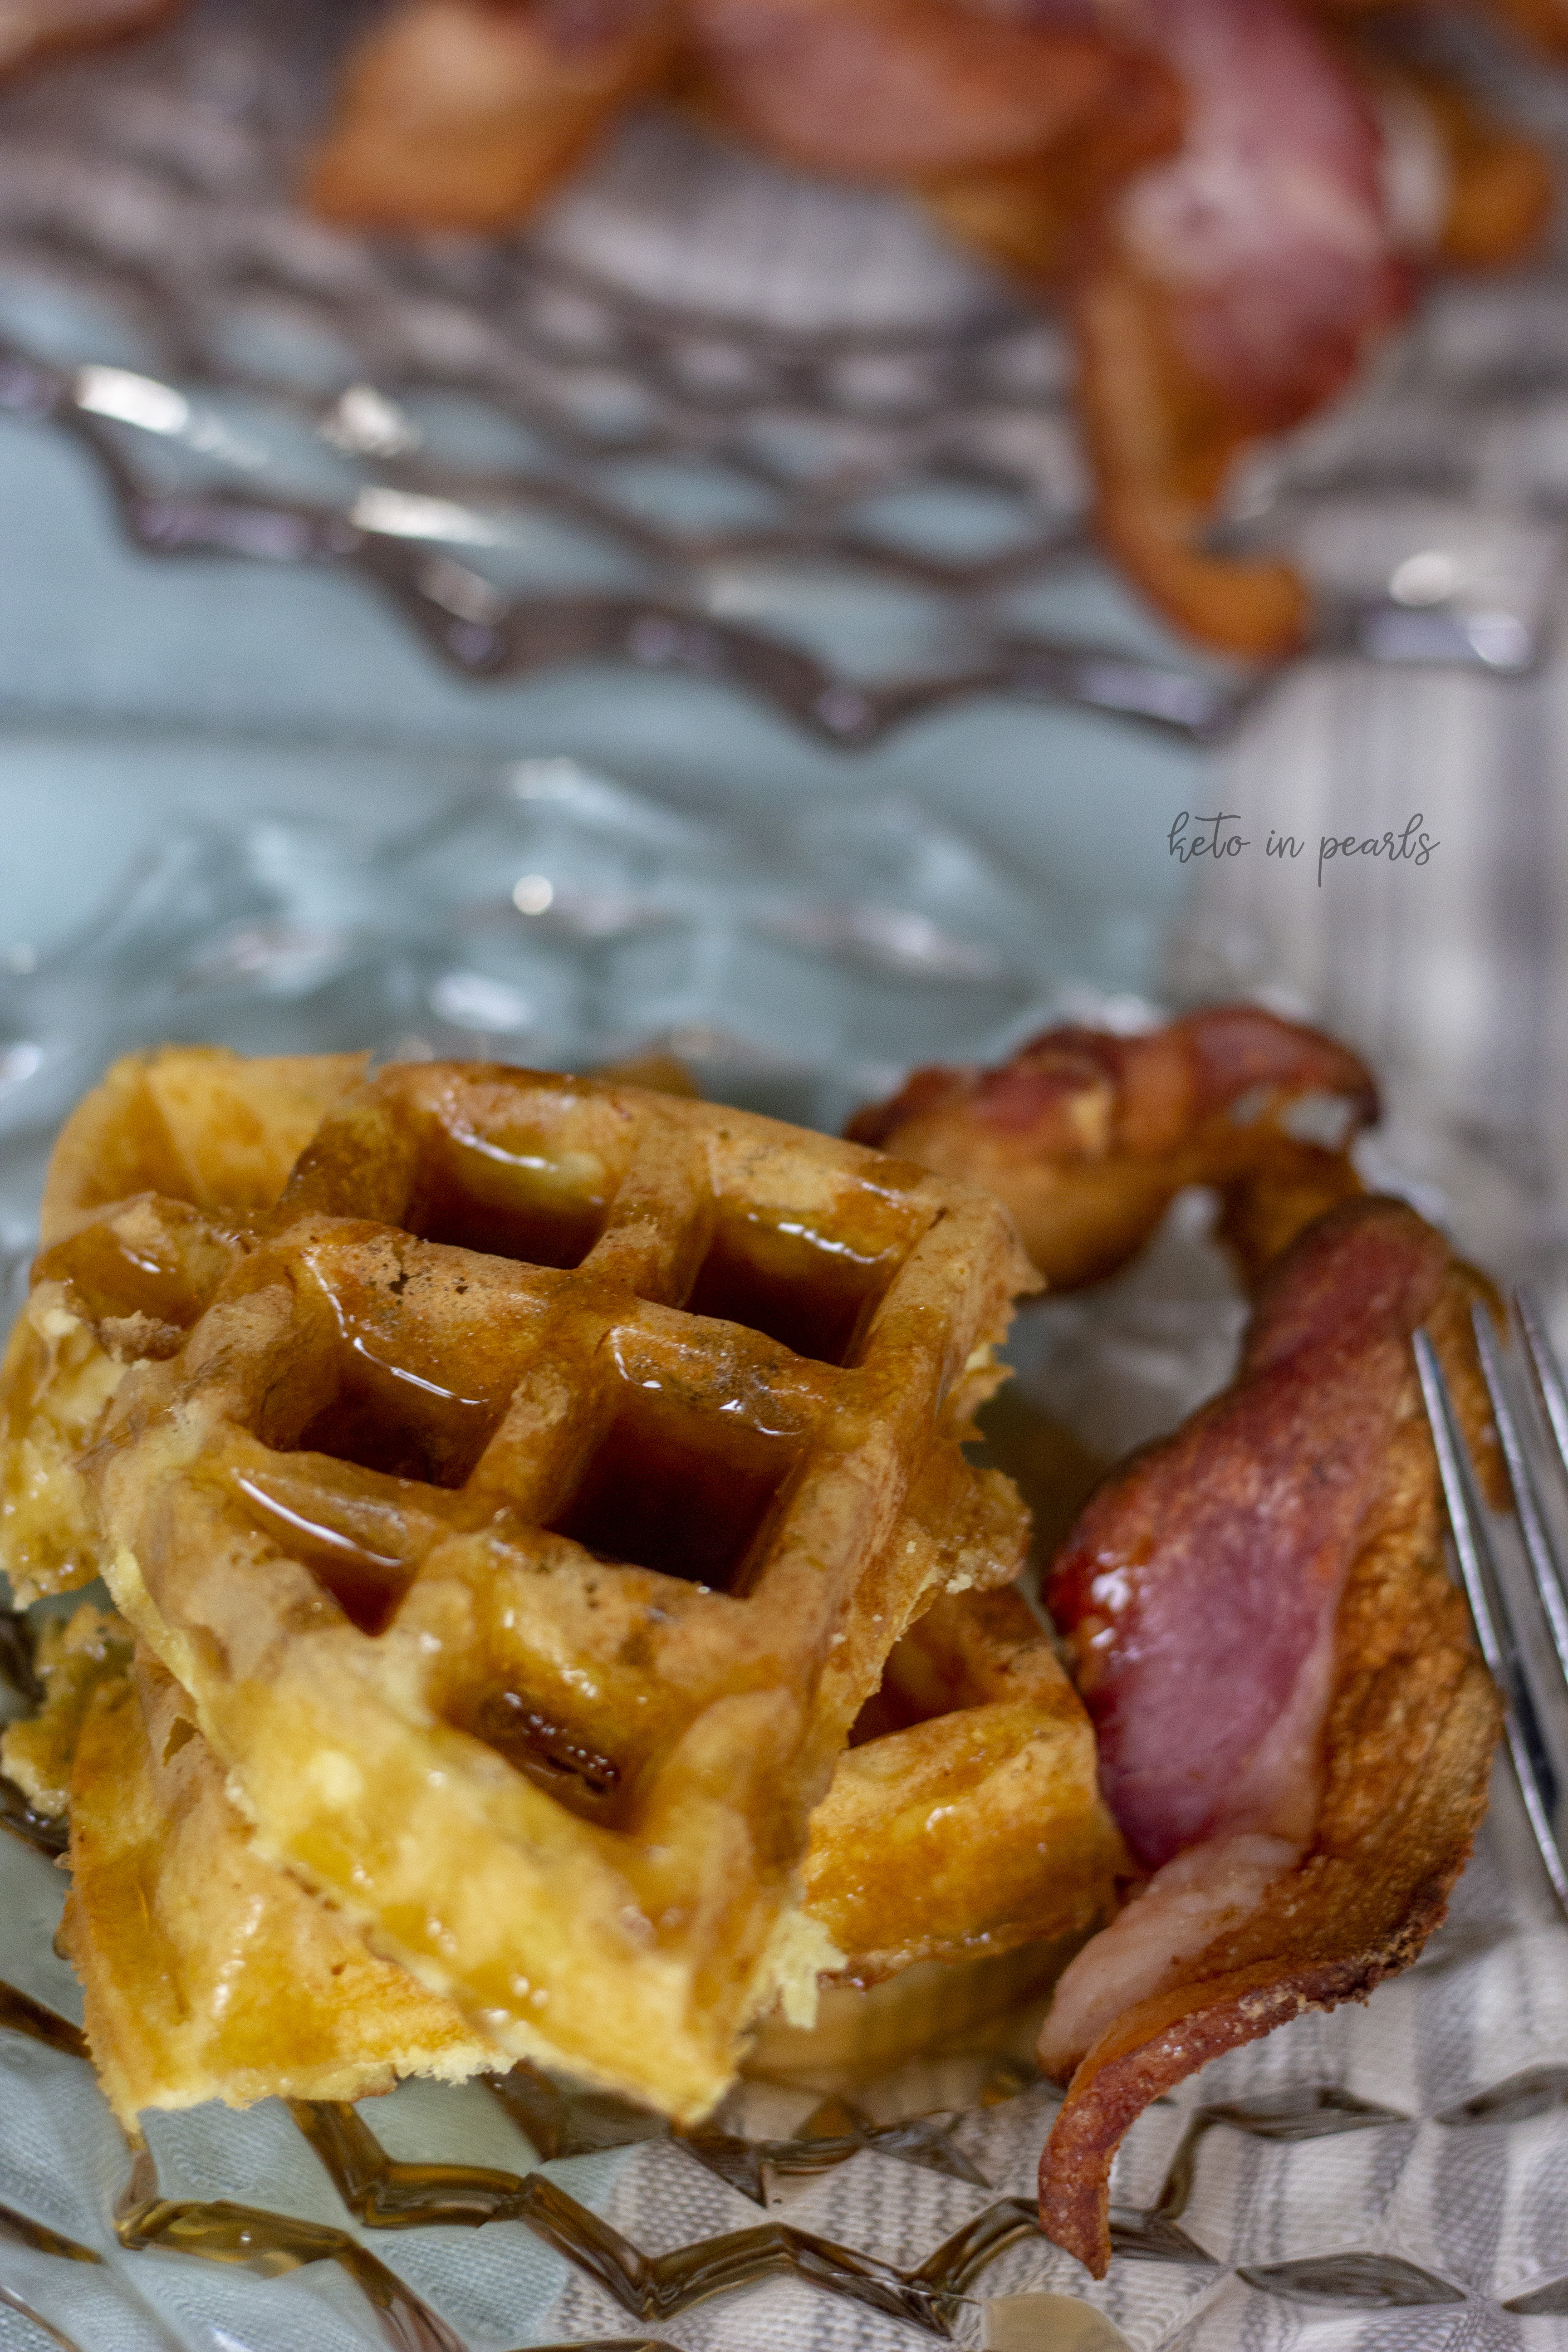 Fluffy keto waffles fit for a lazy Saturday morning! Only 3 net carbs per serving and perfect paired with your favorite sugar free maple syrup.